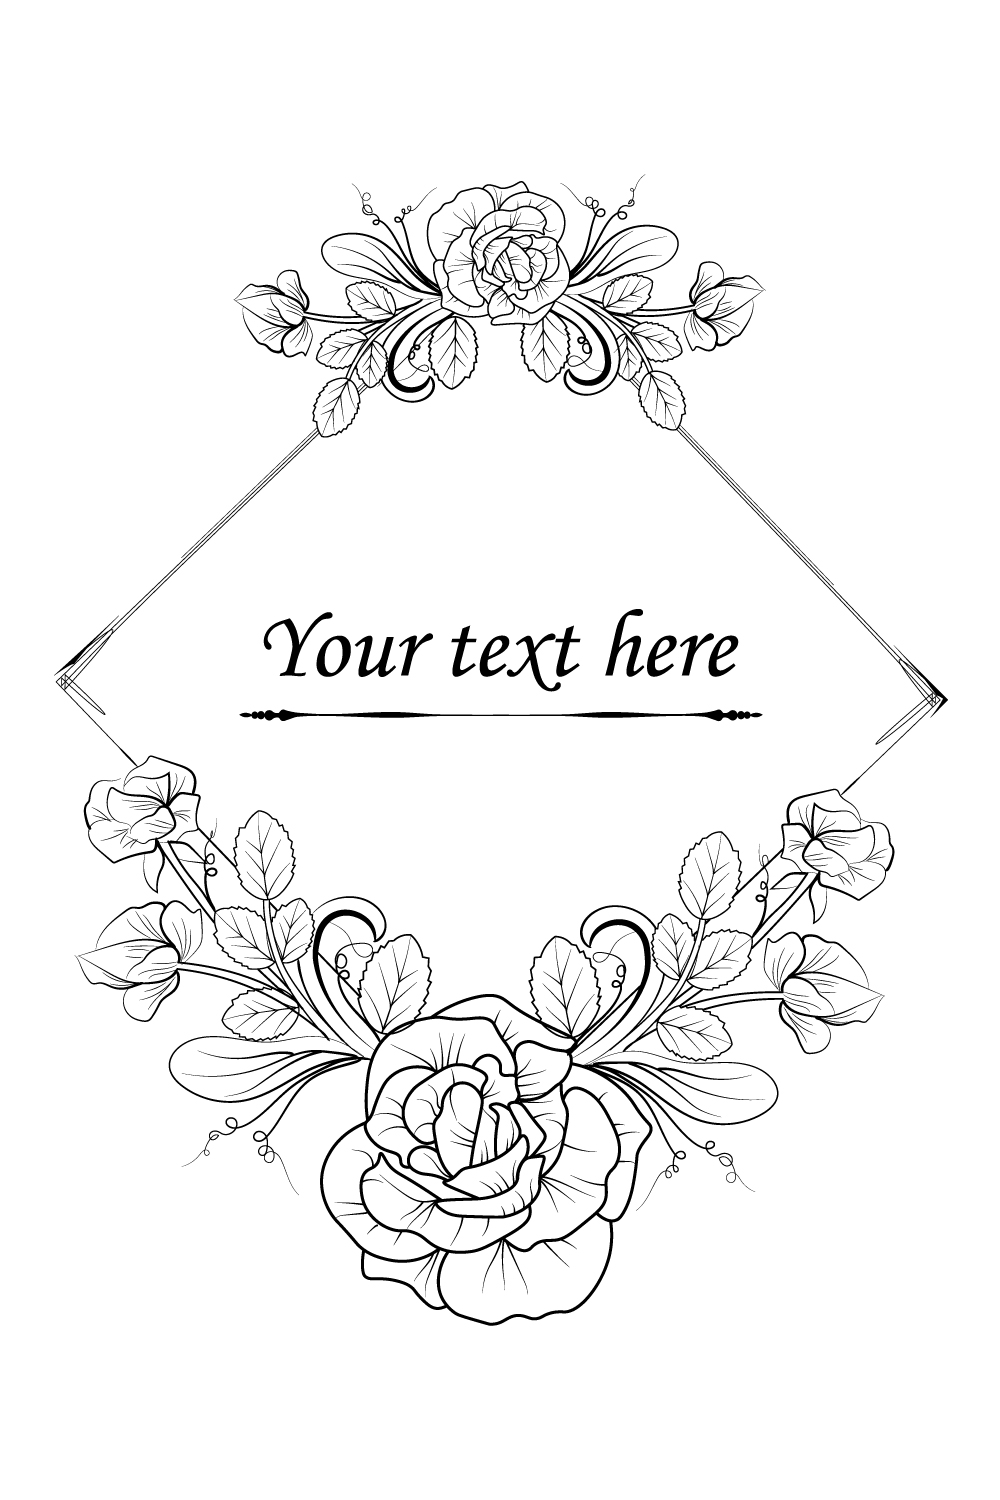 rose vector, rose vector black and white, vector rose flower clipart black and white, pinterest preview image.